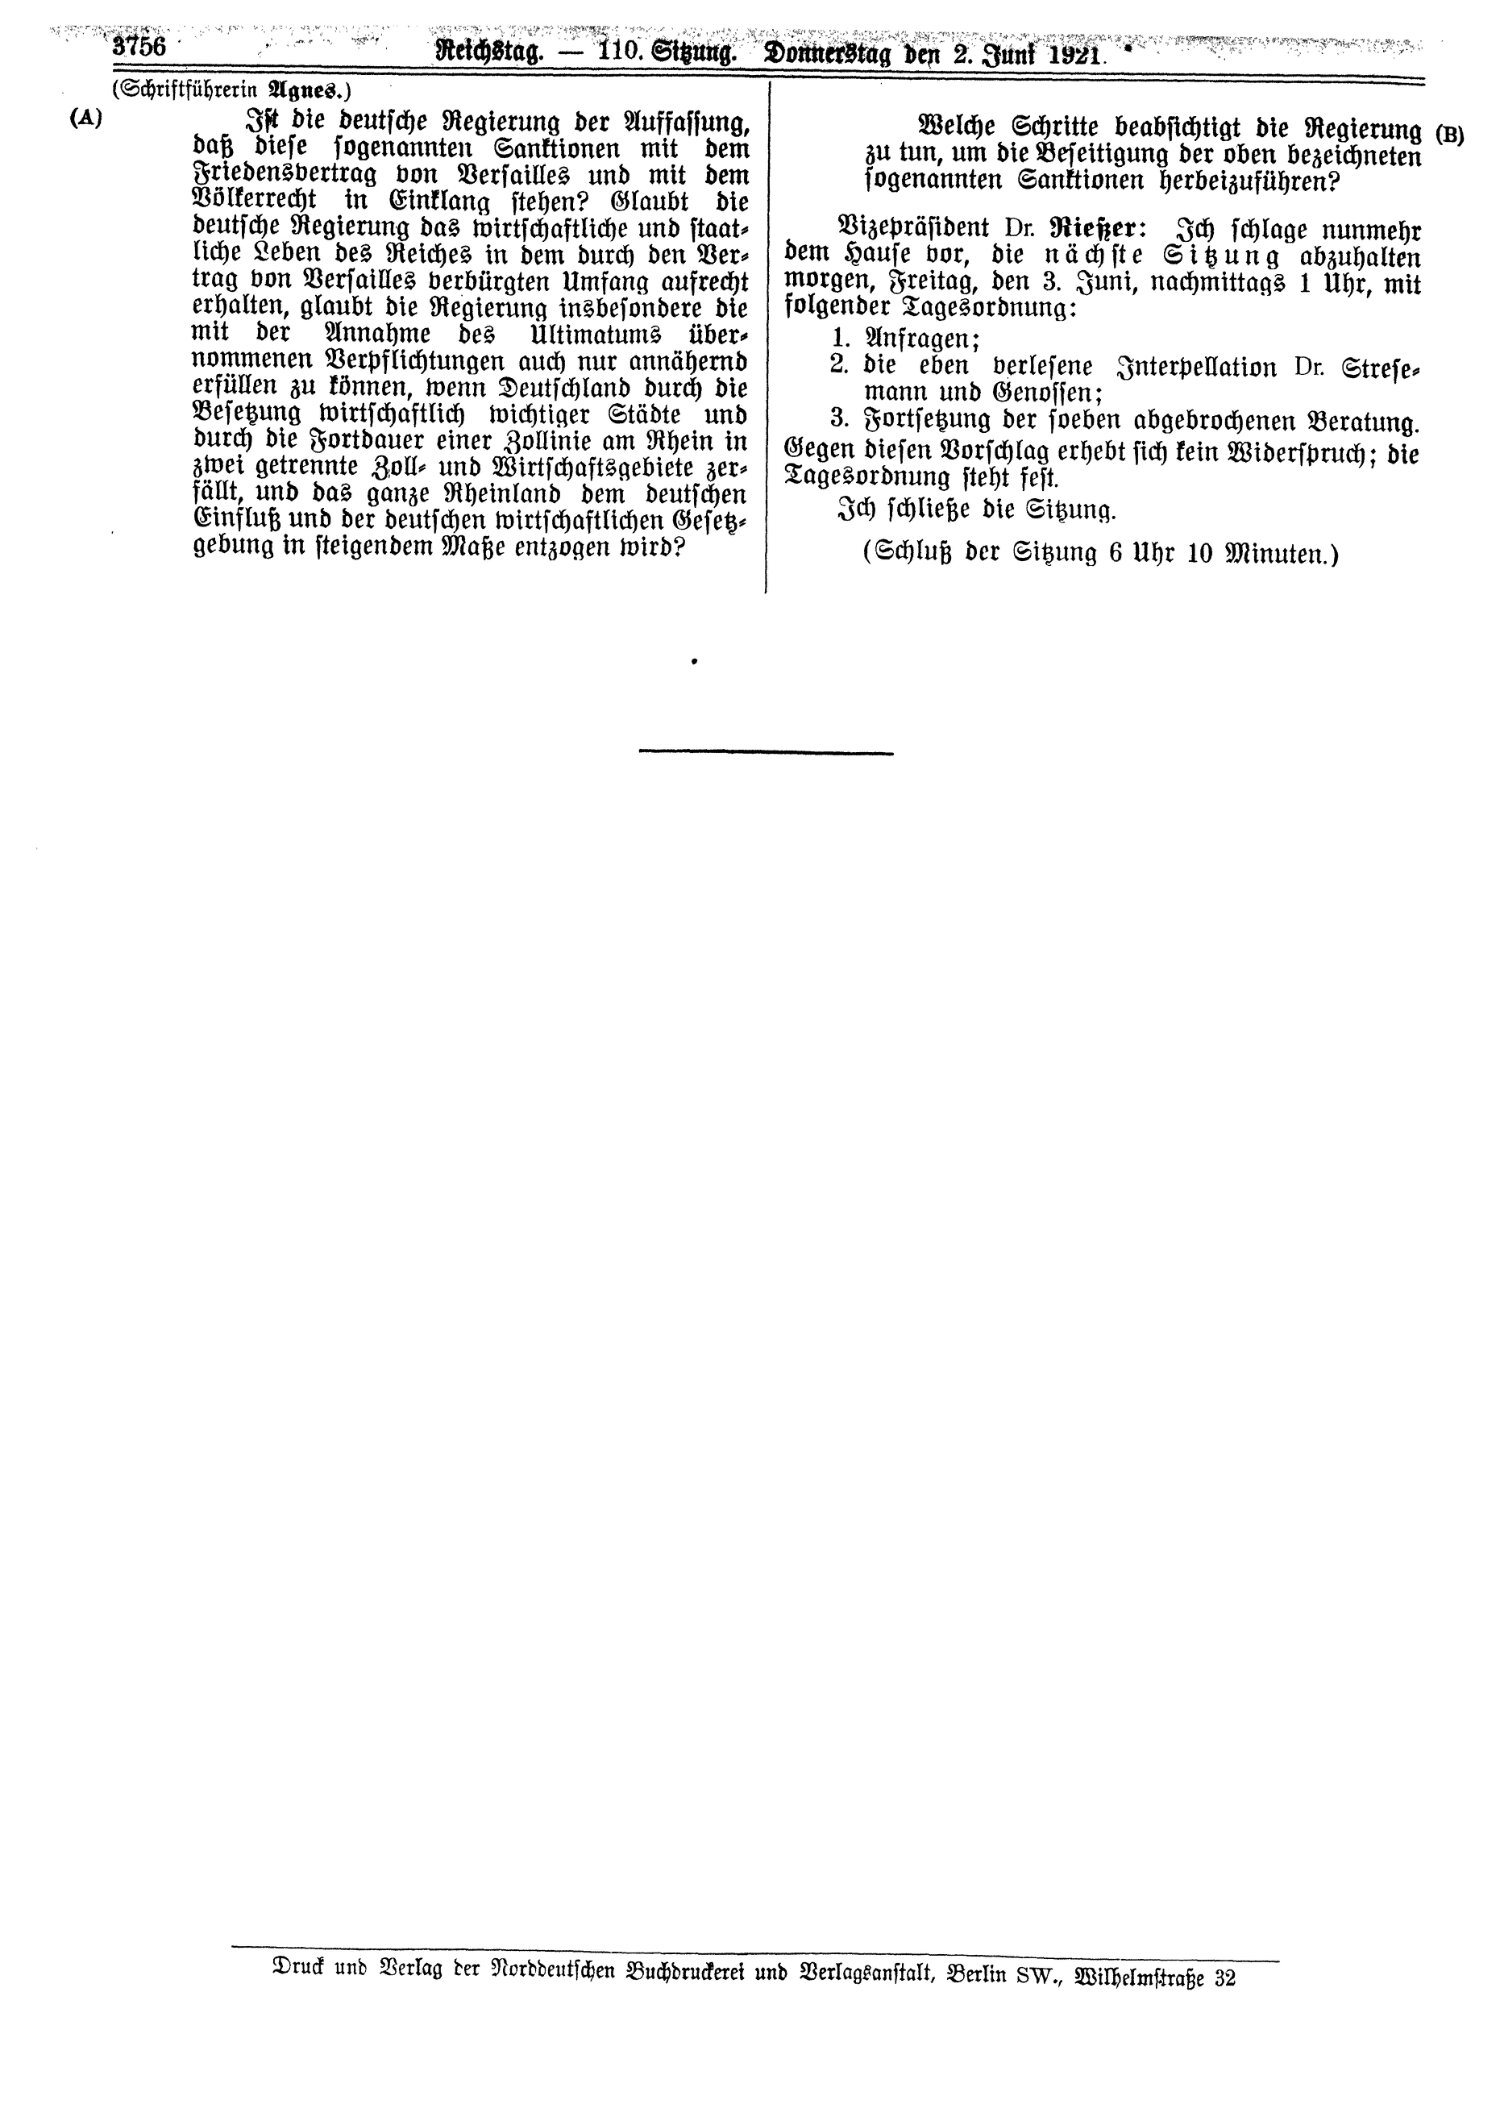 Scan of page 3756